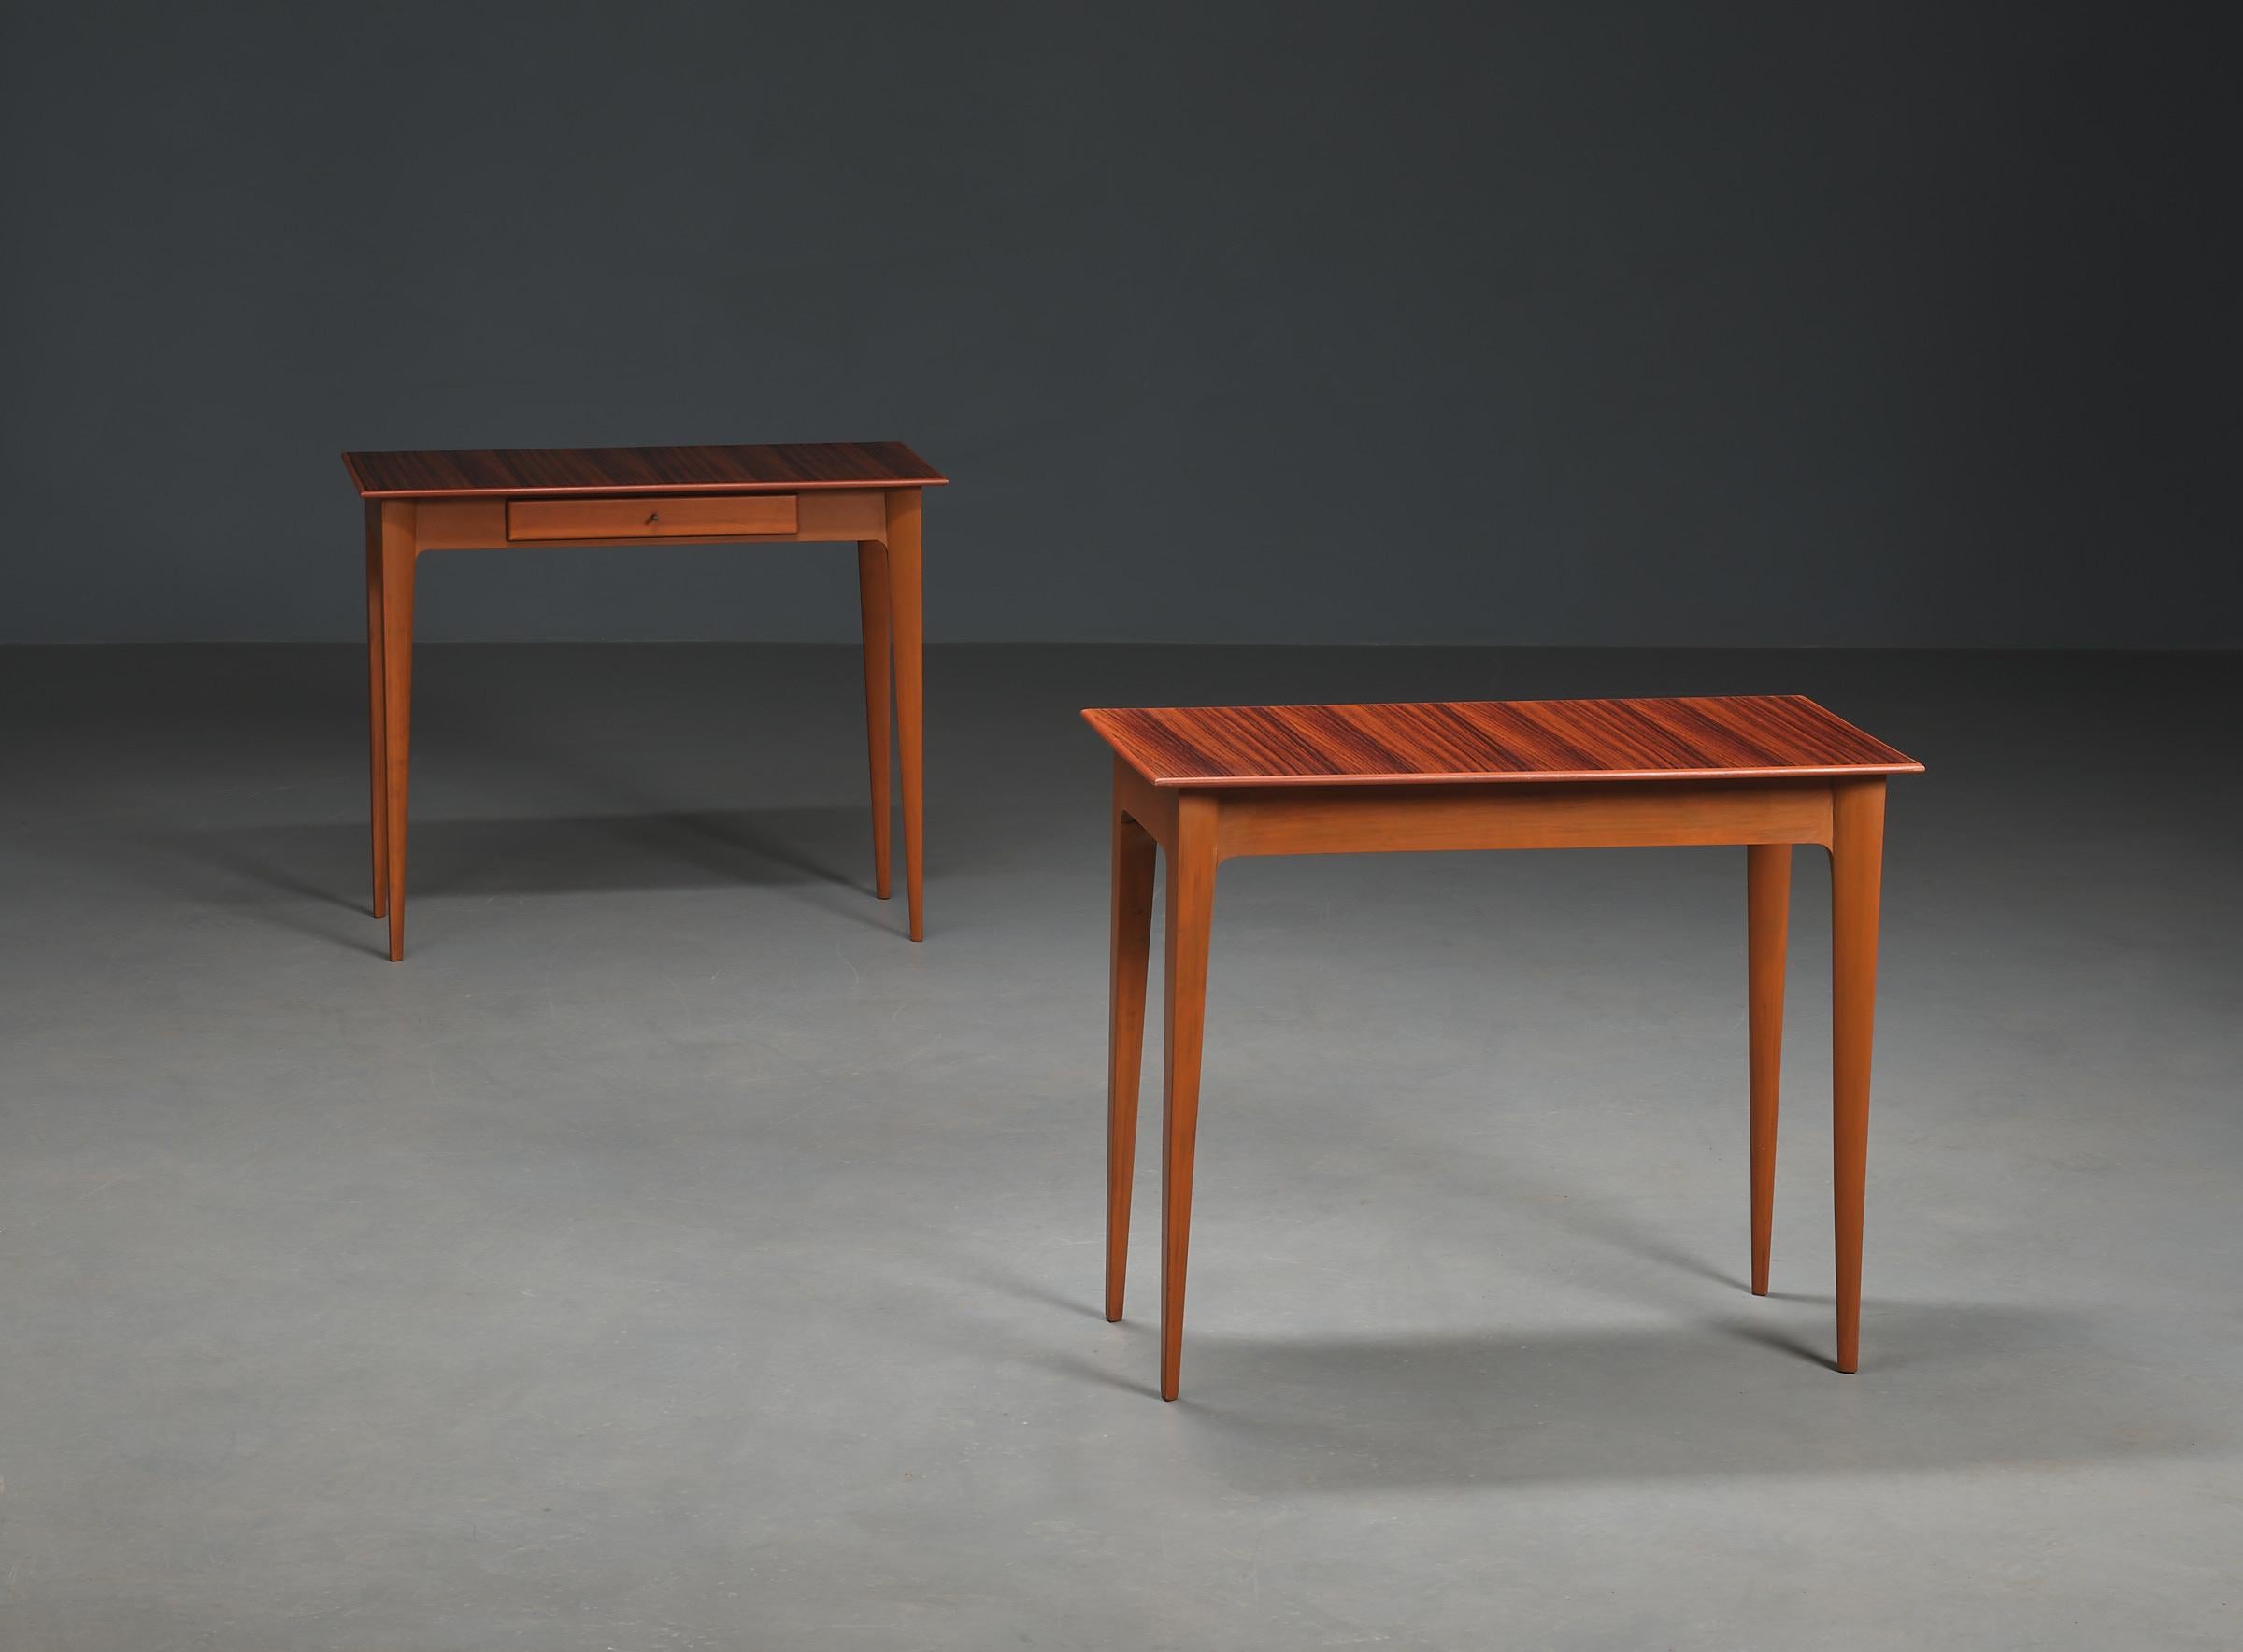 Explore this pair of 1950s Italian side tables that perfectly encapsulate the Italian design aesthetic of the era. Crafted from fine wood with slender tapered legs, these tables are a testament to Italian craftsmanship at its finest.

The teak